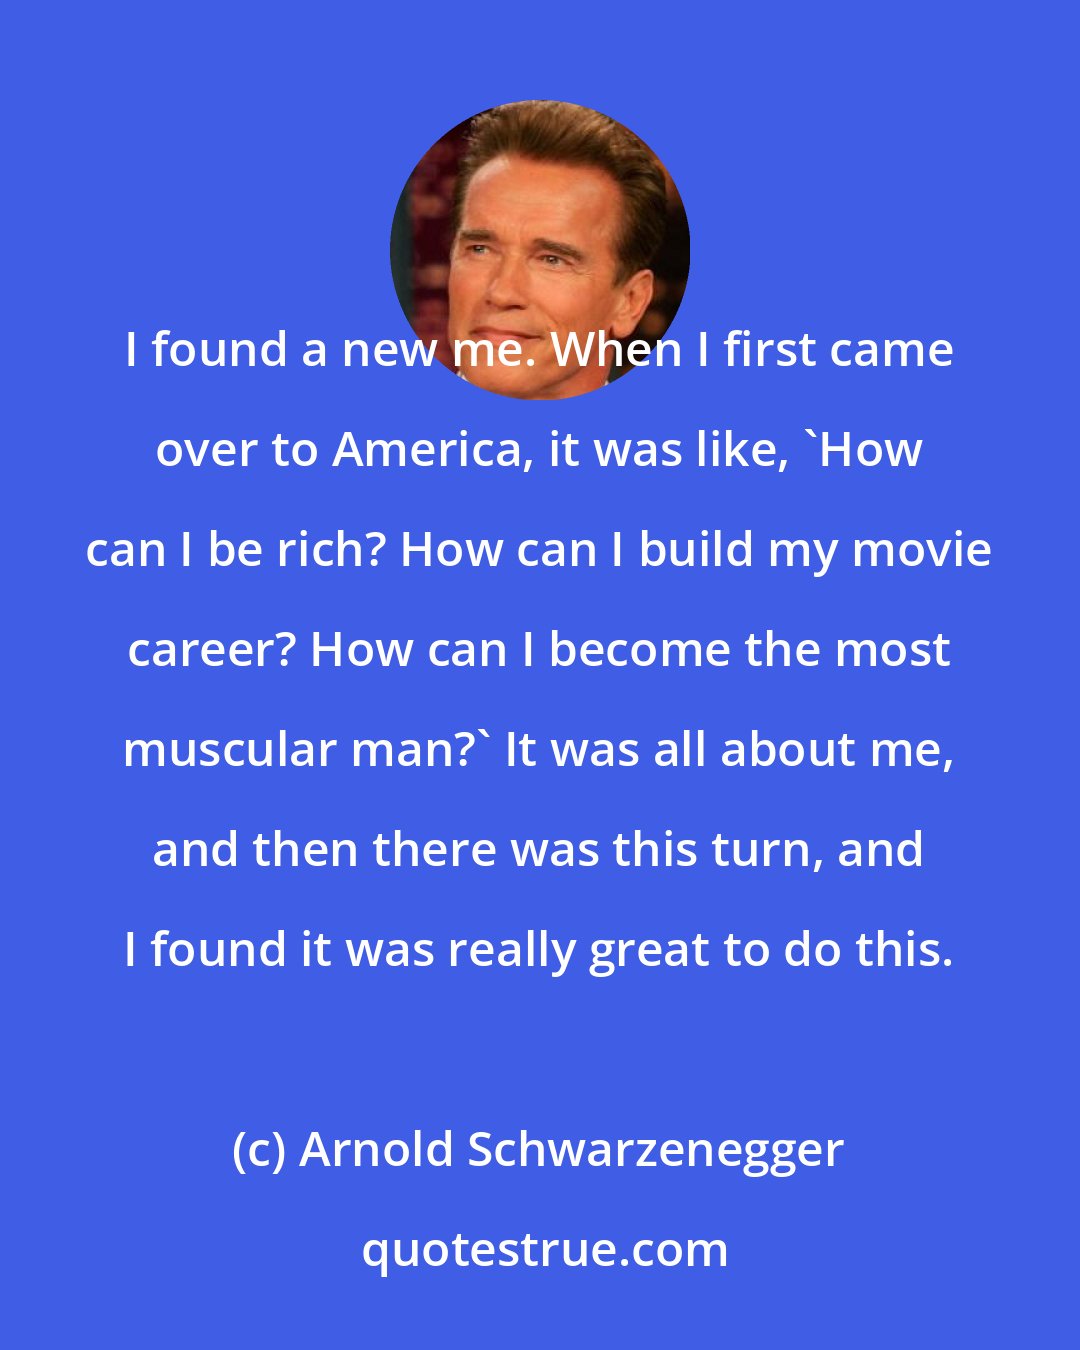 Arnold Schwarzenegger: I found a new me. When I first came over to America, it was like, 'How can I be rich? How can I build my movie career? How can I become the most muscular man?' It was all about me, and then there was this turn, and I found it was really great to do this.